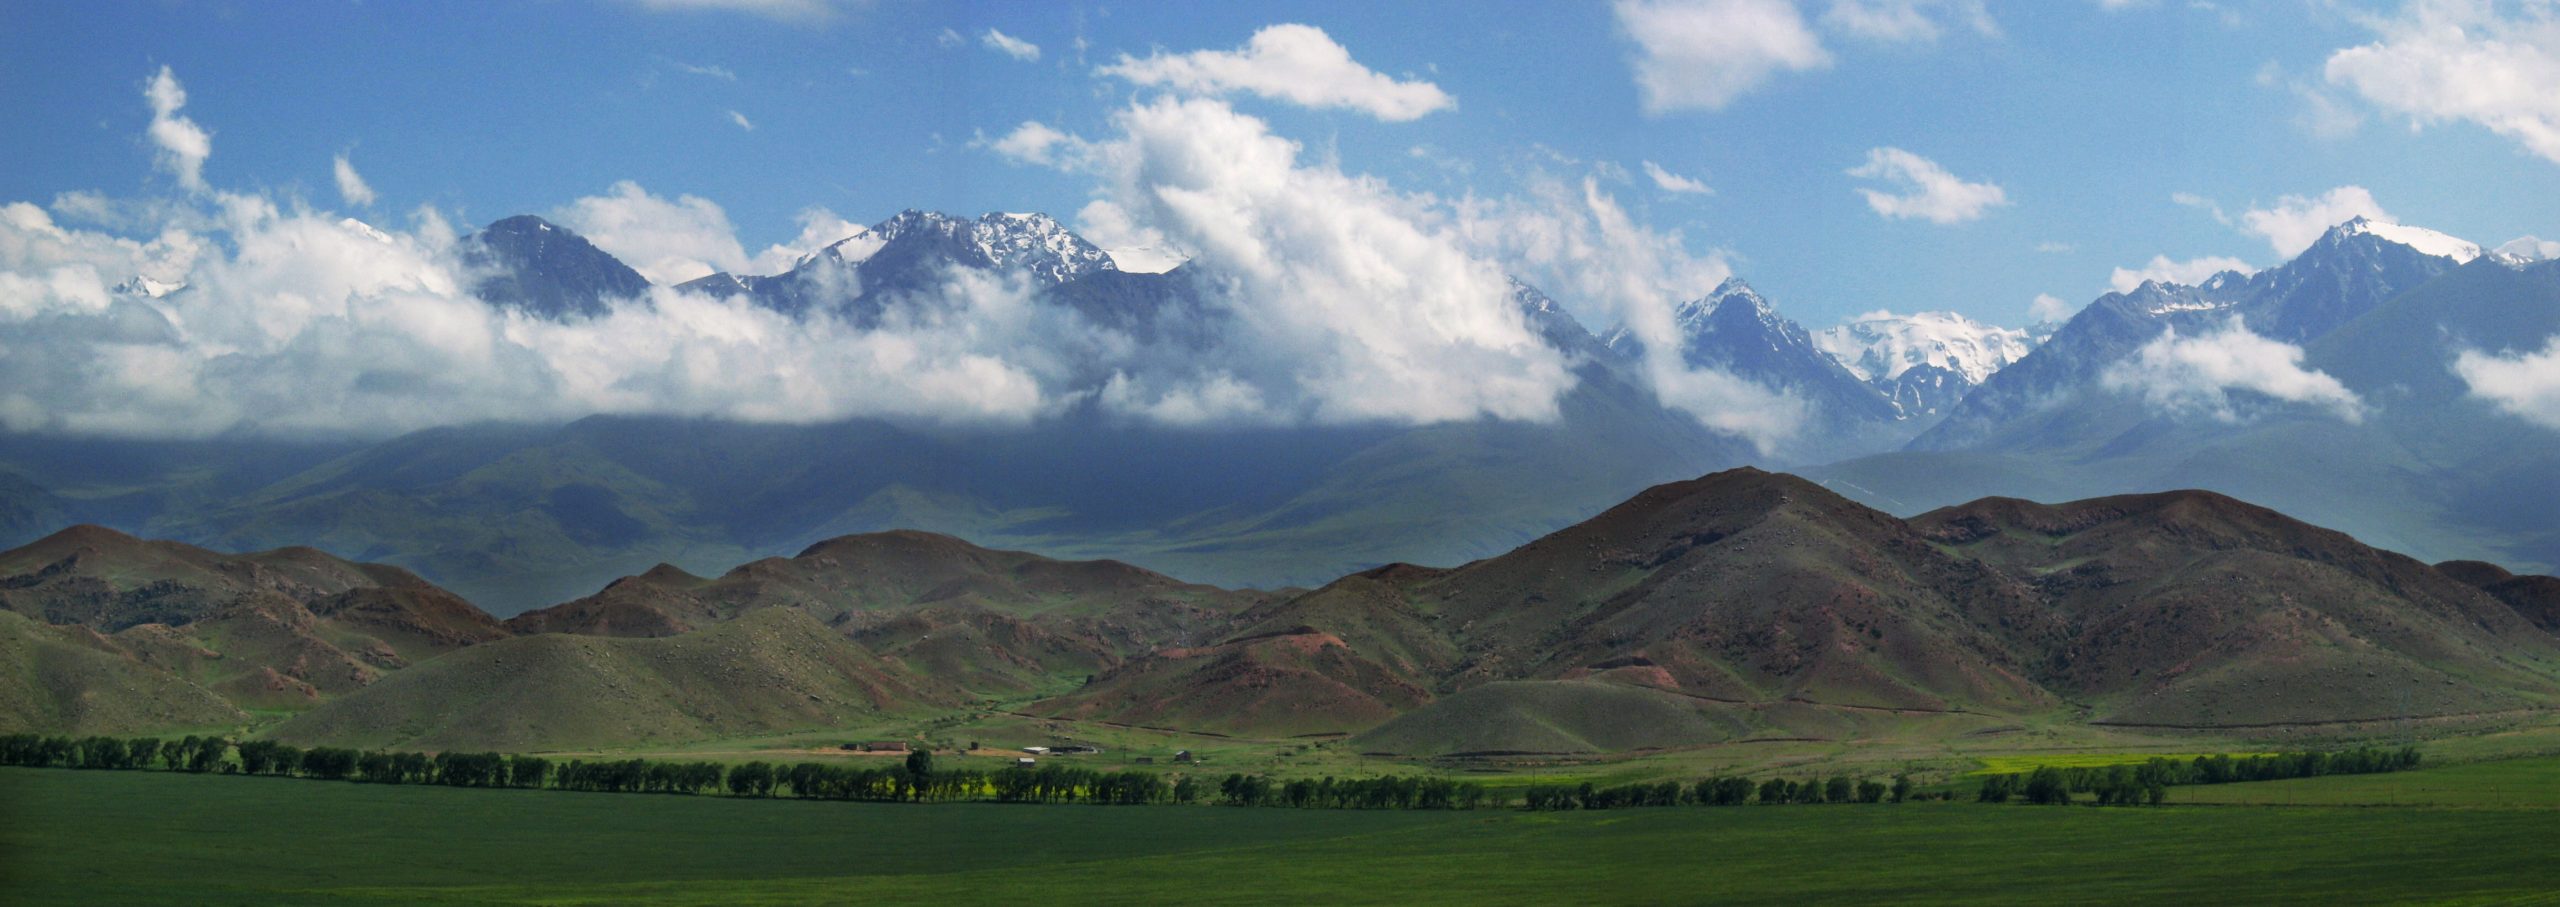 Sarychat-Eеrtash State Reserve, Kyrgyzstan